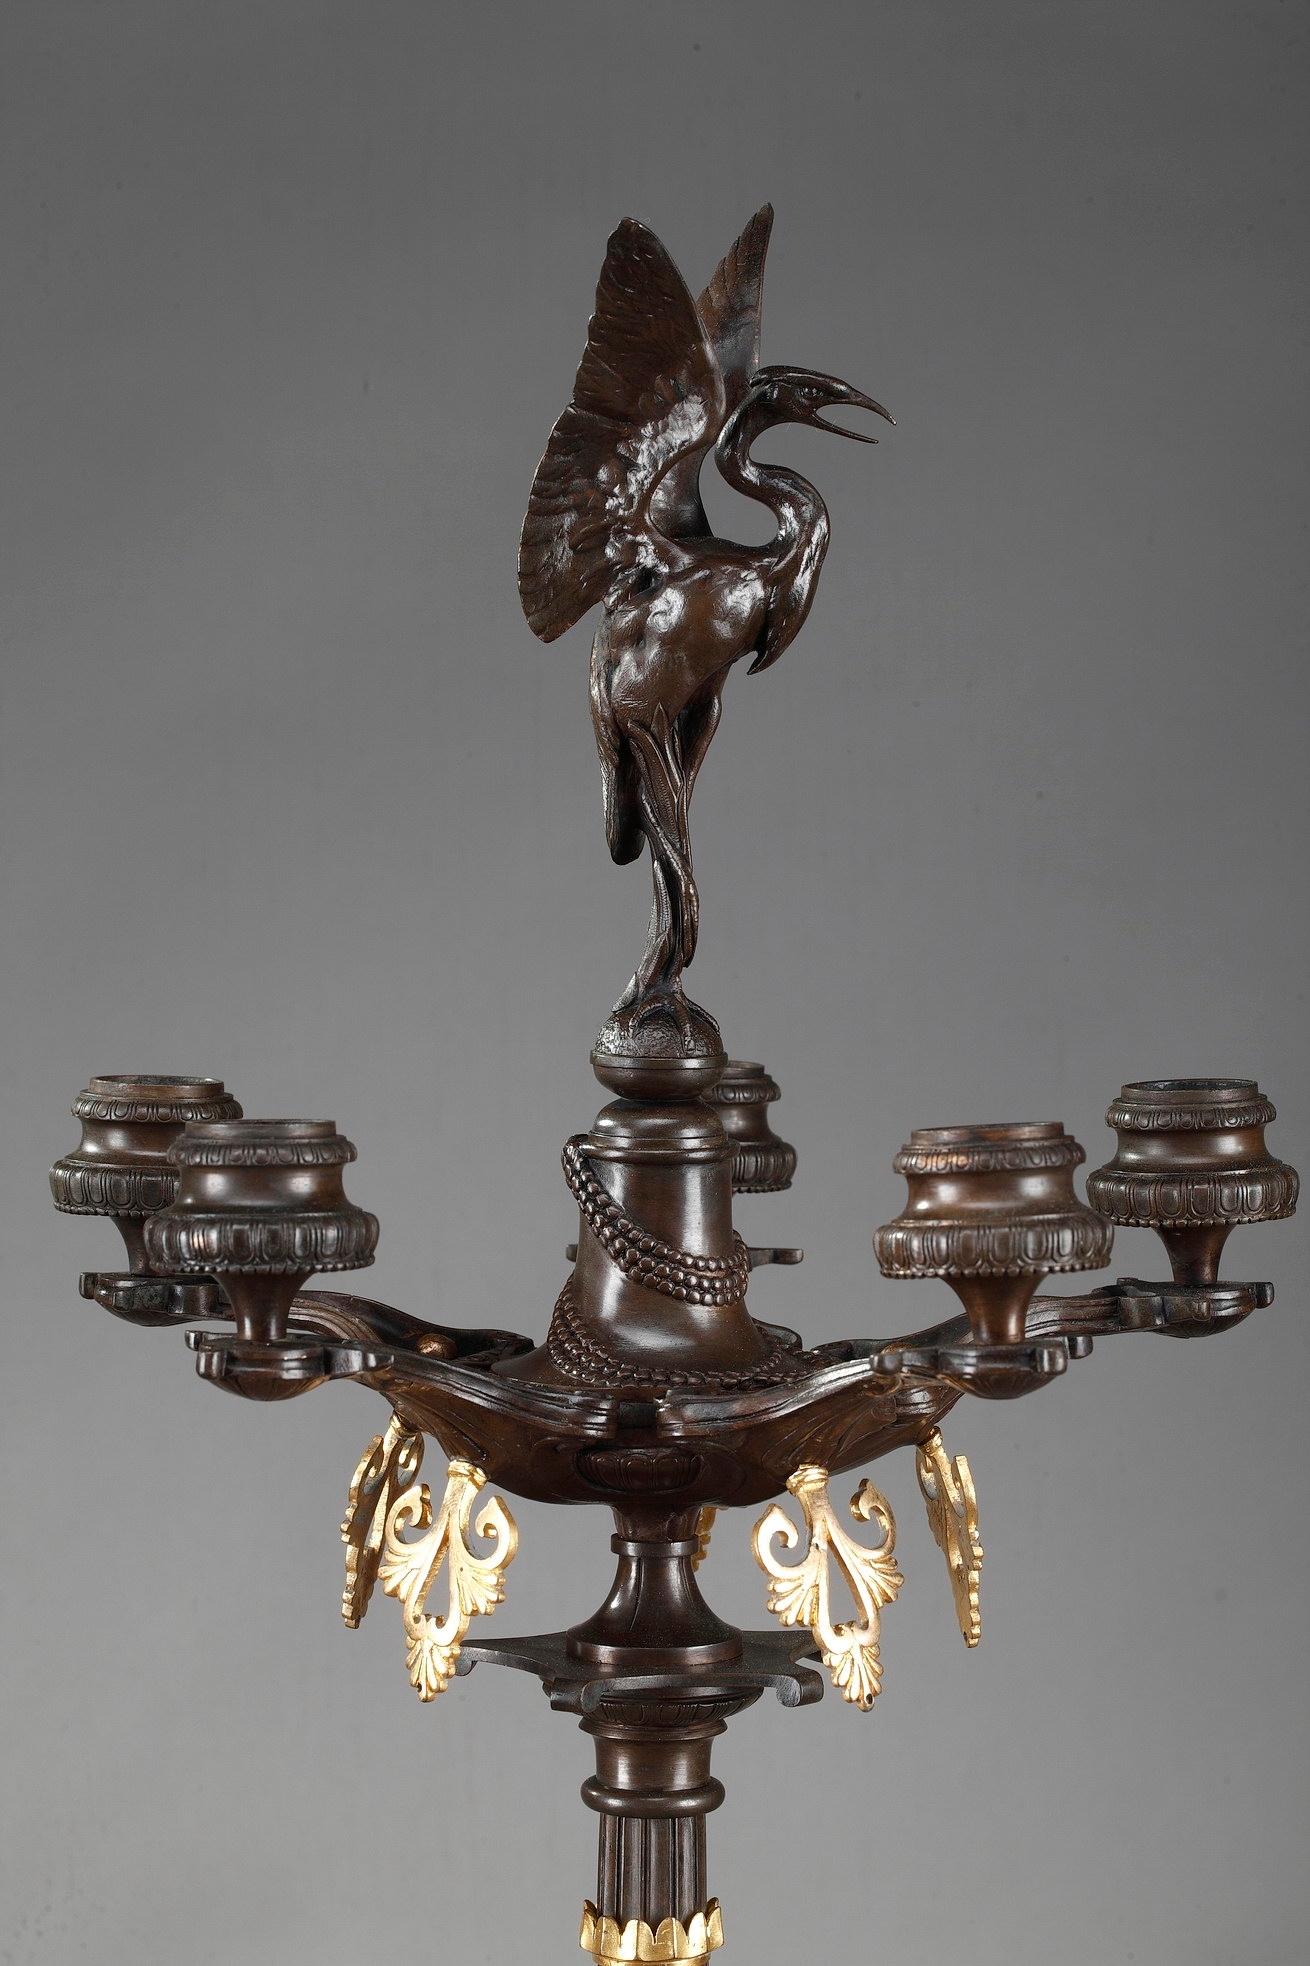 Pair of candelabra on foot in patinated and gilded bronze with rich decoration of busts and mythical creatures drawn from the medieval bestiary in a neo-Greek taste. The base of each candelabra is decorated with chimeras and openwork foliage in gilt